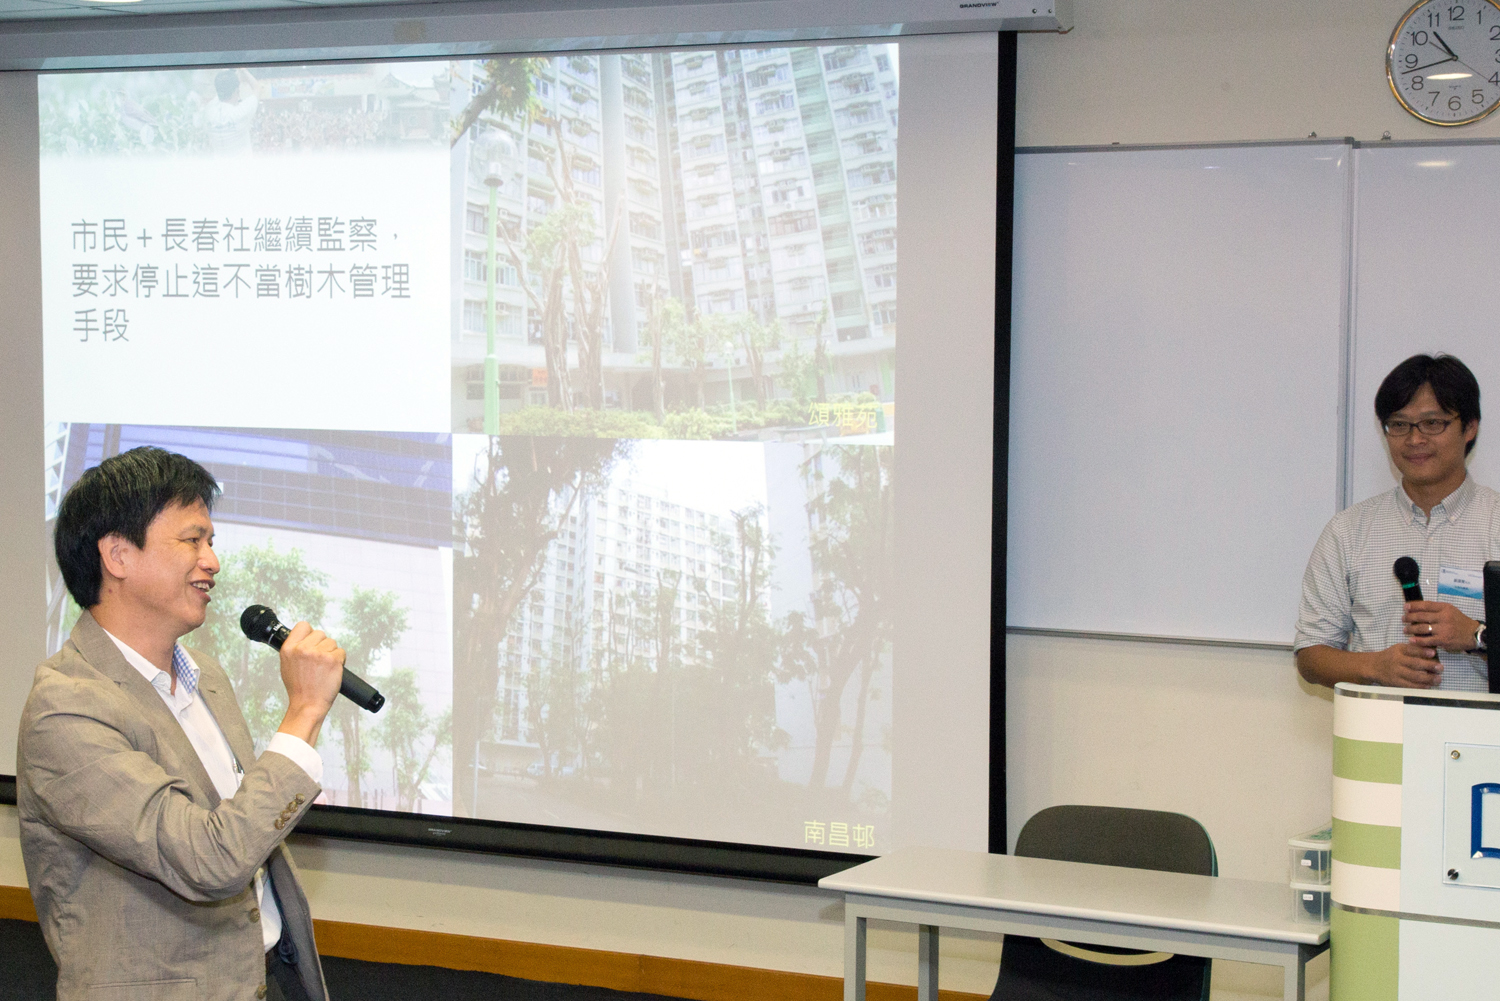 The speakers introduced the importance of tree management through a case study in Hong Kong. 